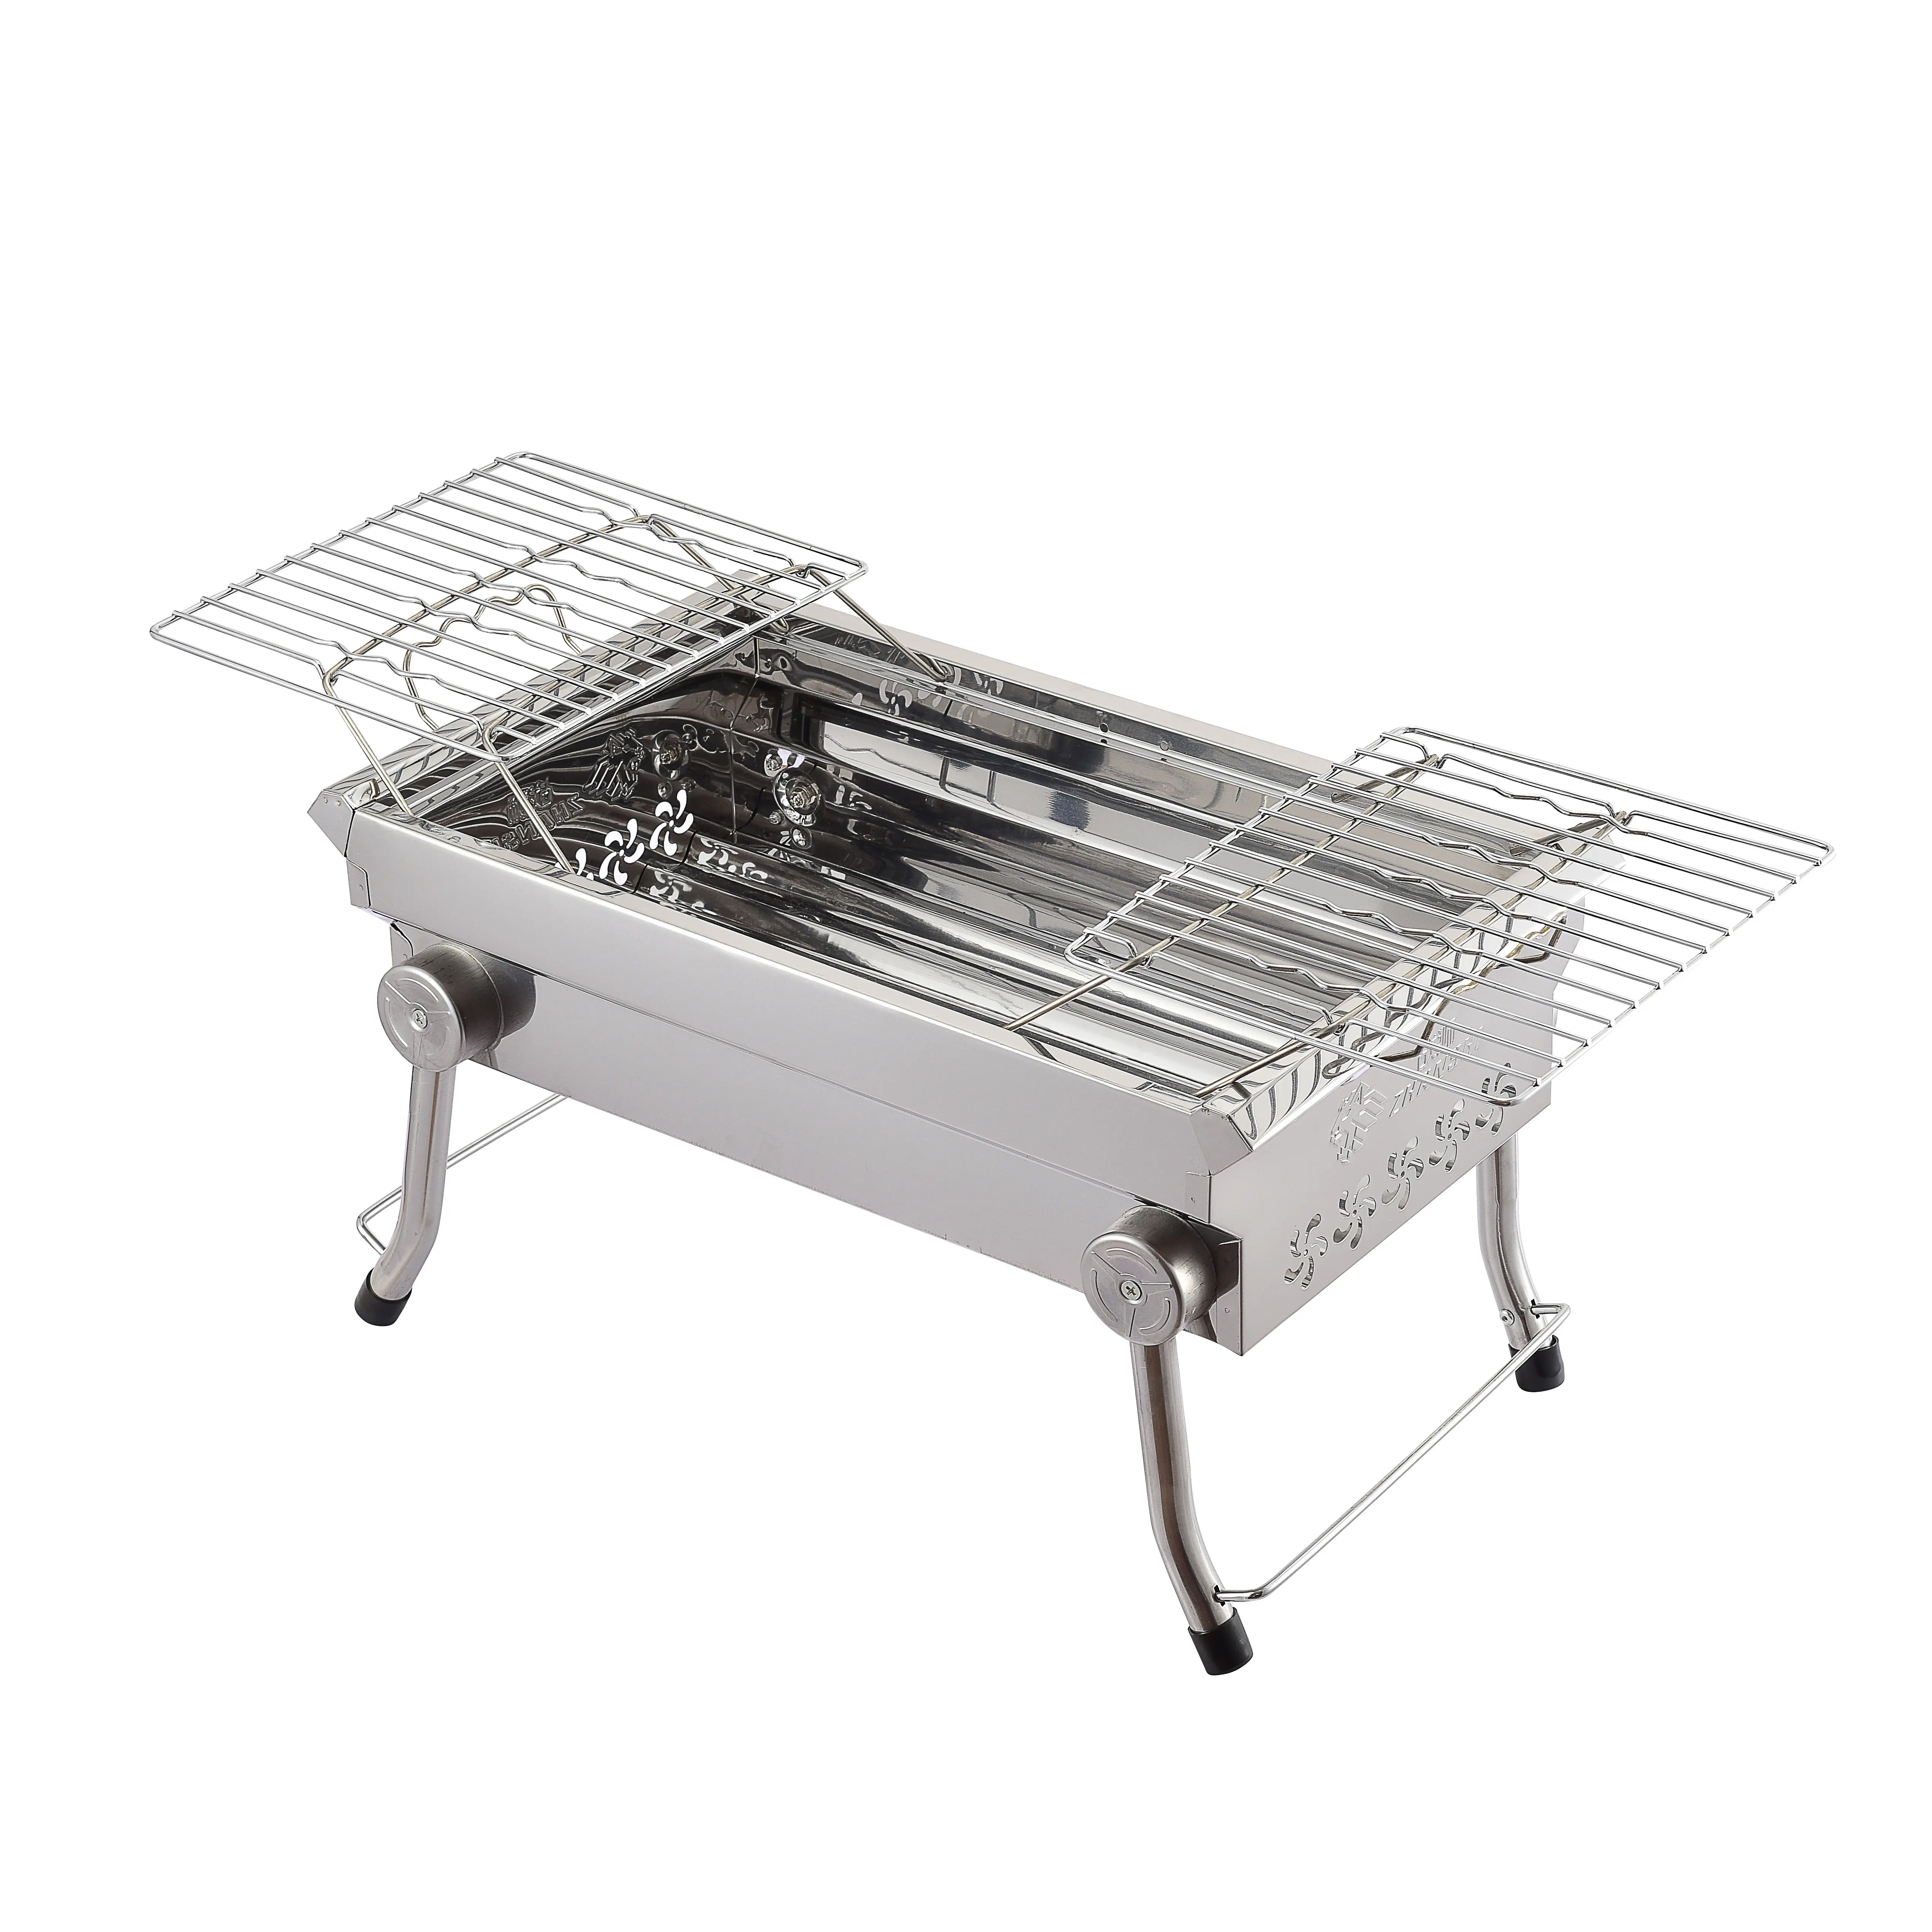 Stand Stainless Steel Folding Outdoor camping Portable Charcoal BBQ Grill Foldable Easy Taking Barbecue BBQ Grill